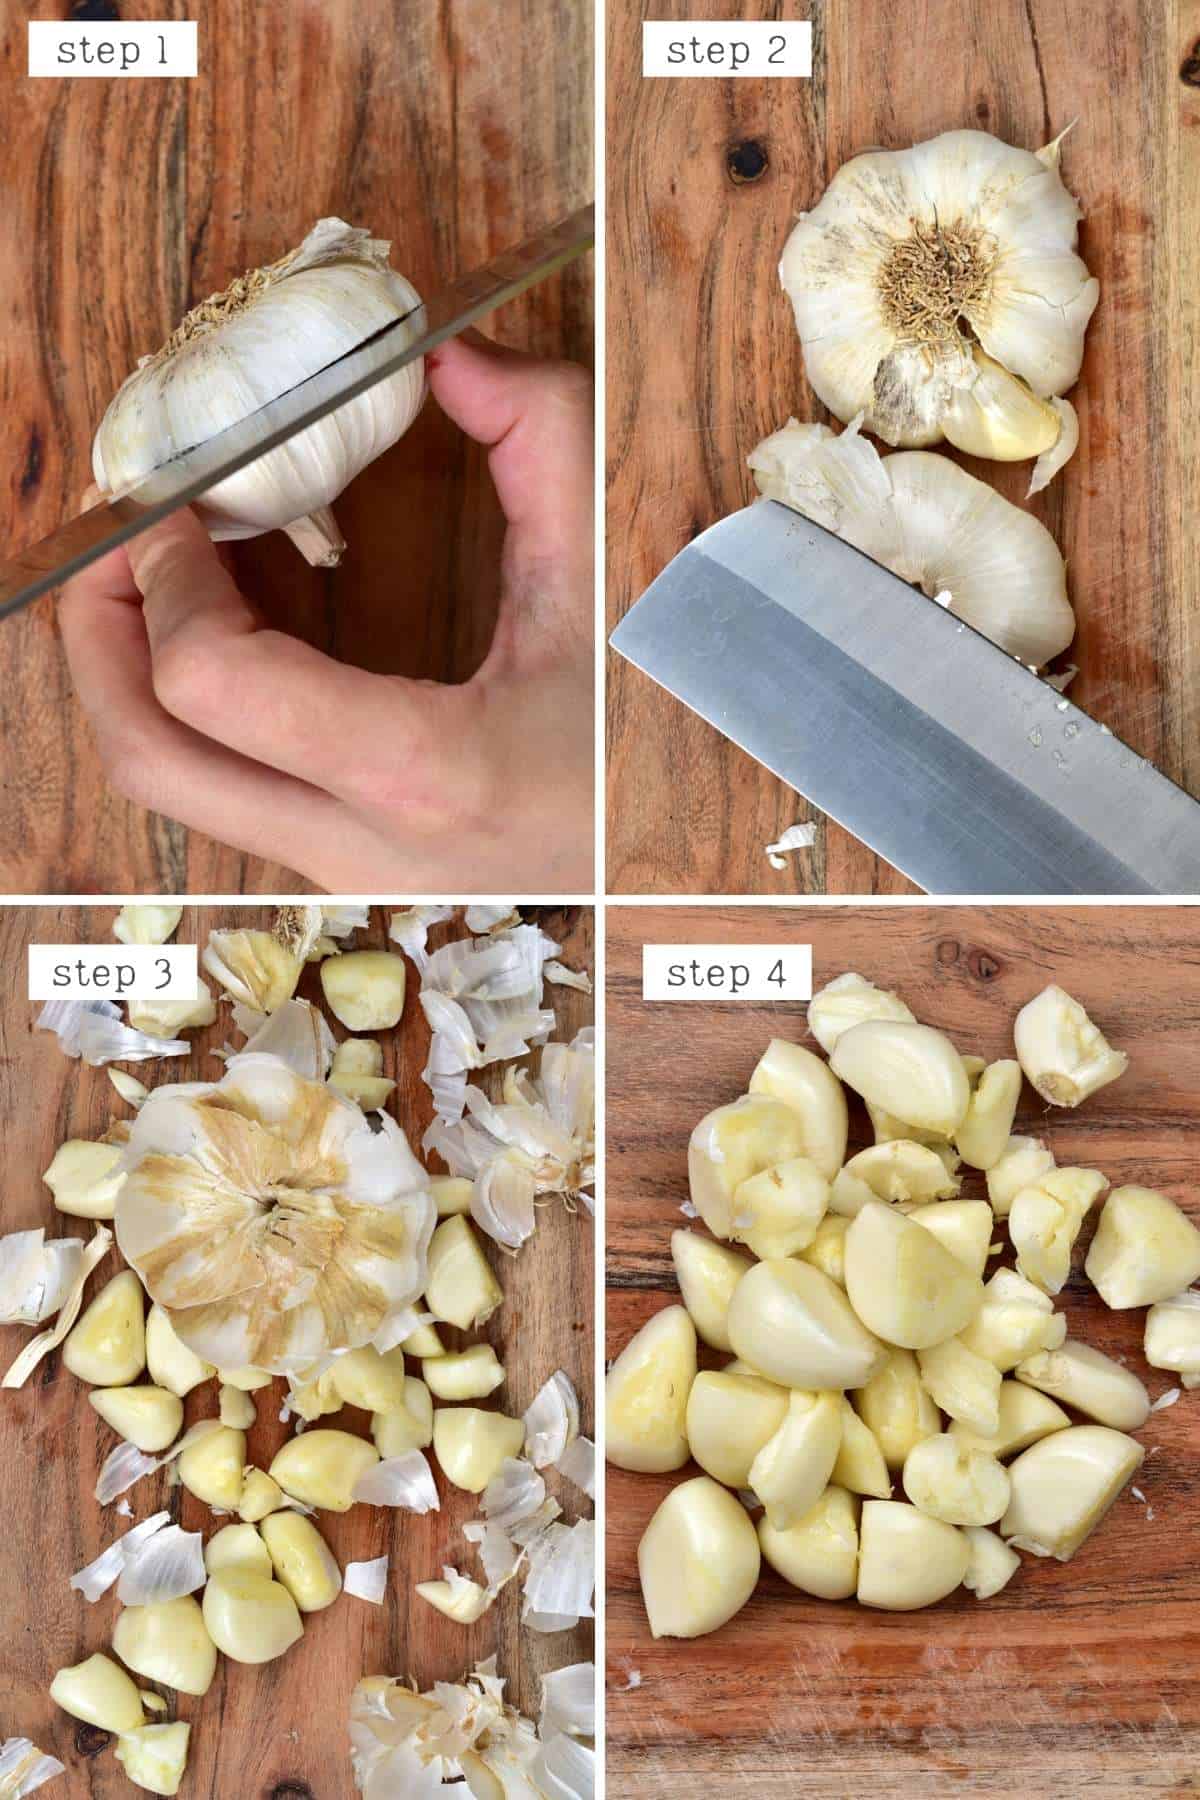 How to Peel Garlic in Seconds with a Drill! (DIY garlic peeling